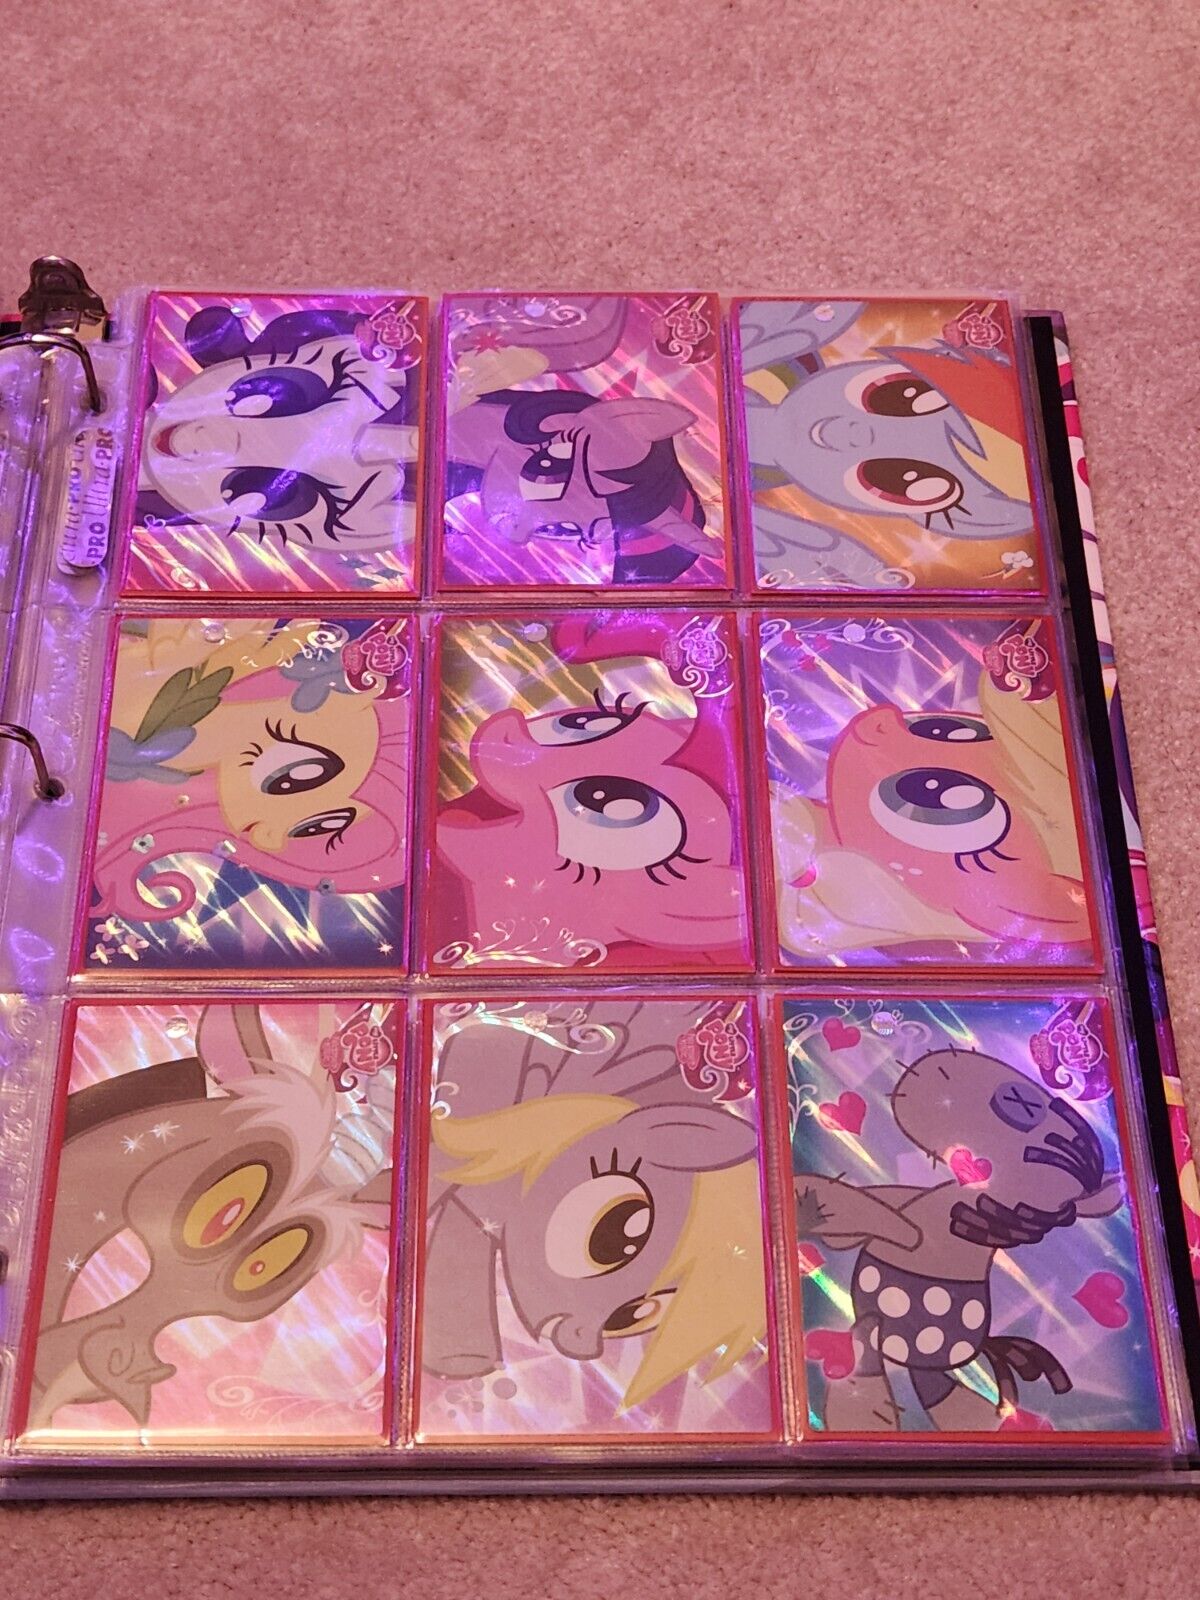 My Little Pony Enterplay Series 2 Fully Complete Has All Promos, Stickers, Etc